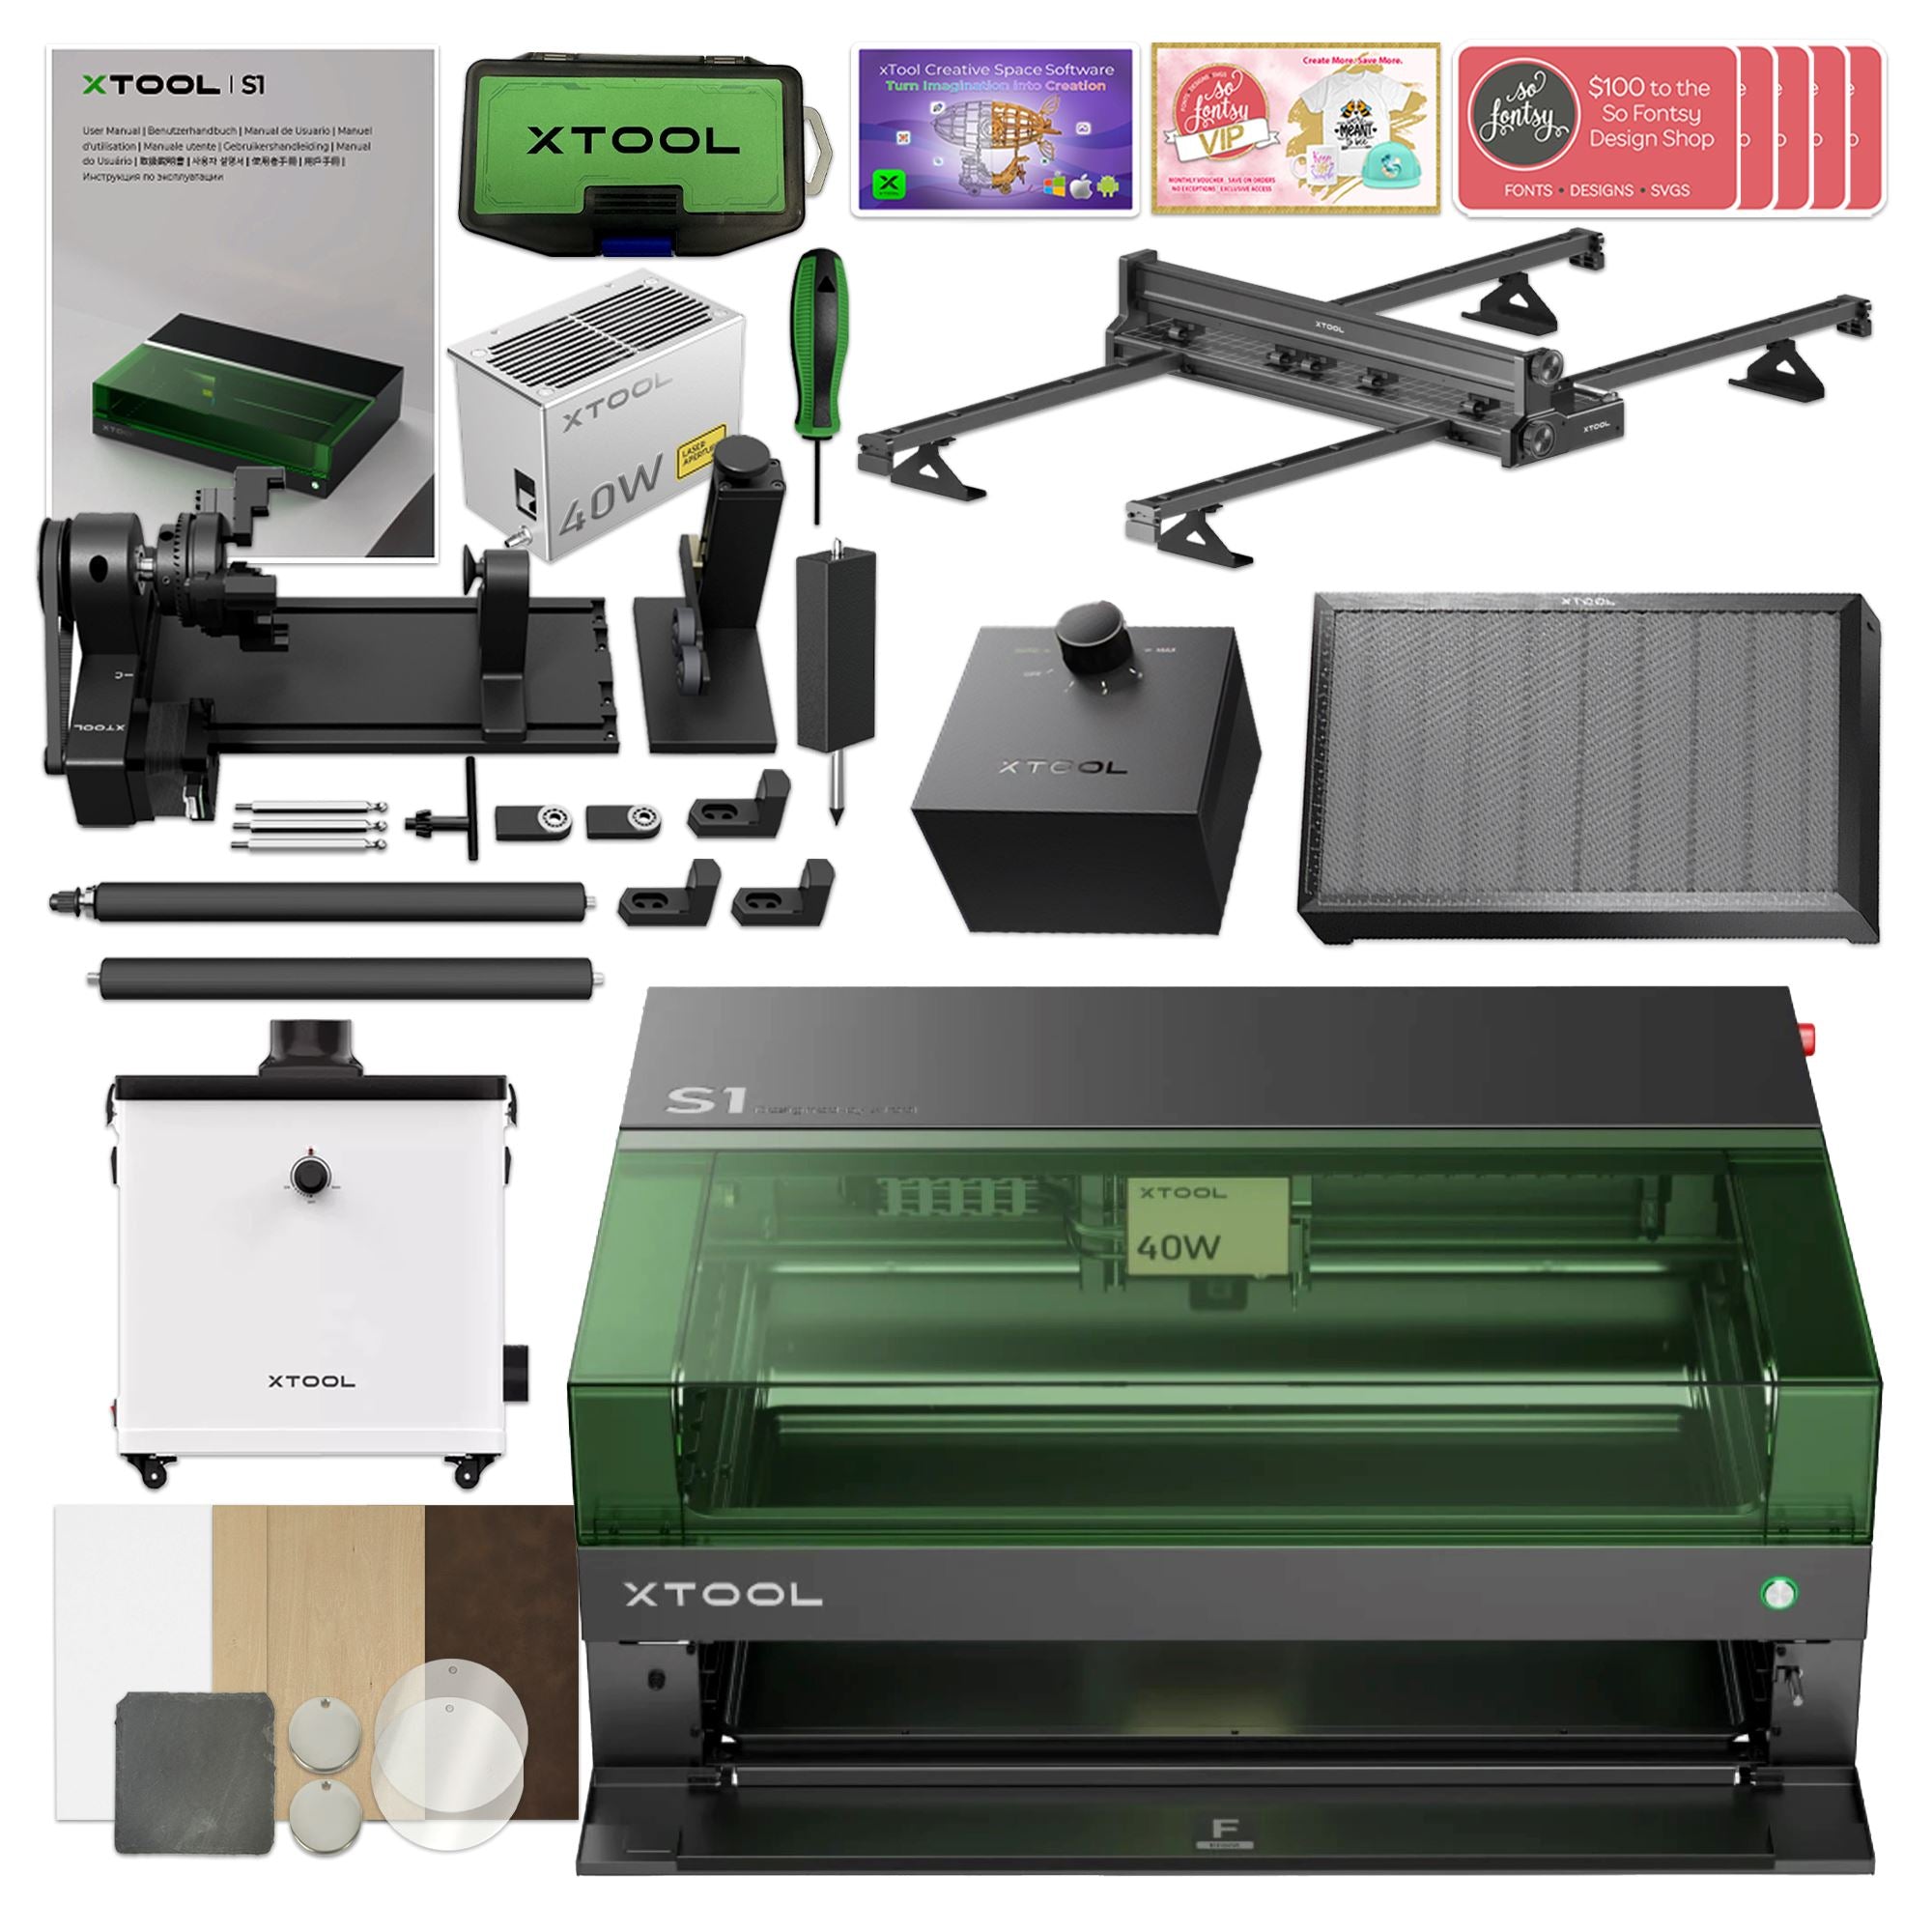 xTool S1 20W/40W Enclosed Diode Laser Cutter/Engraver